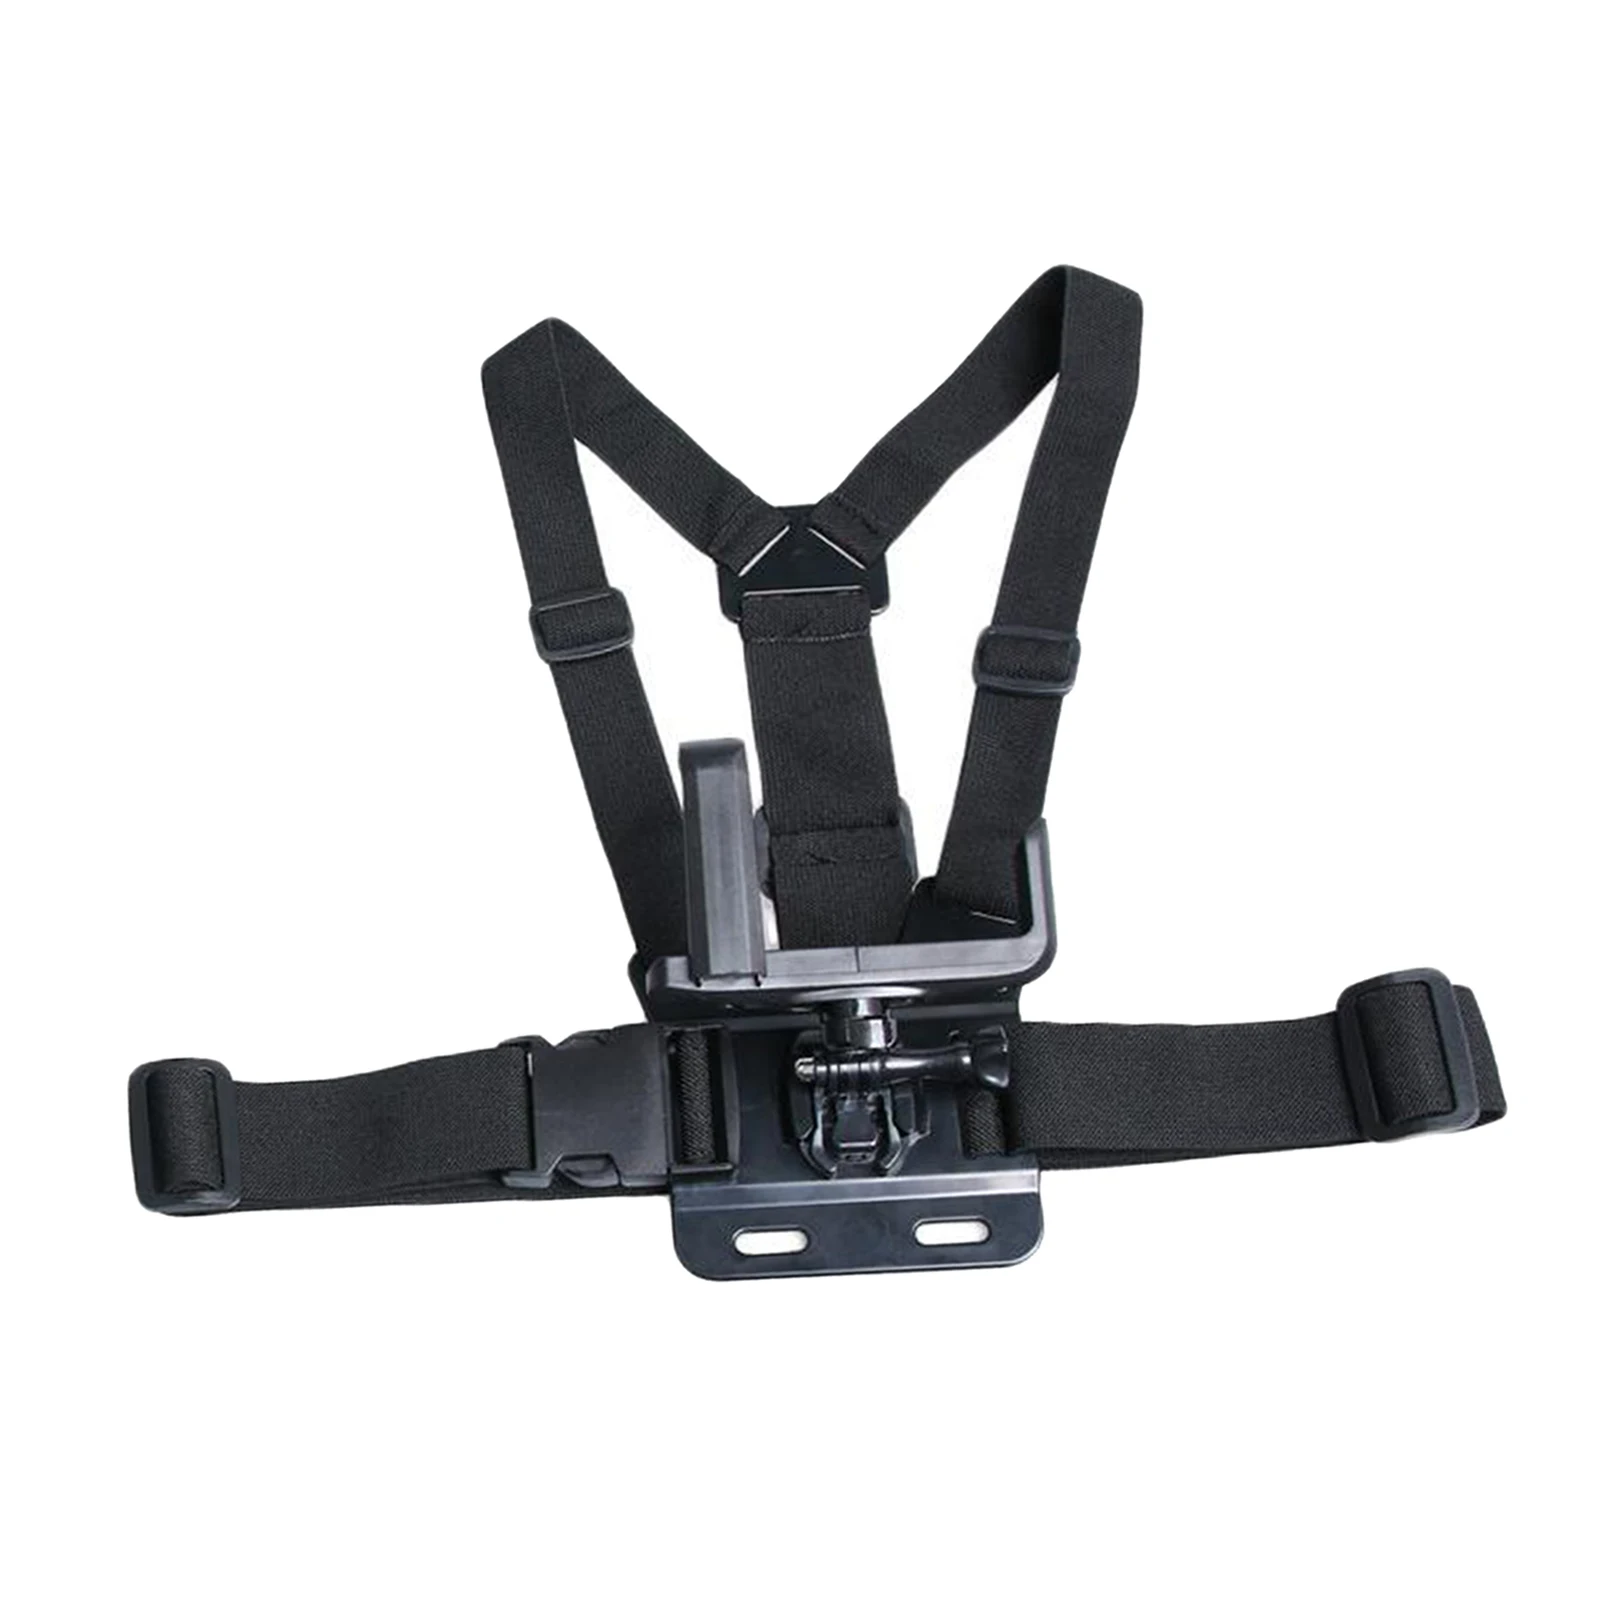 Adjustable Mobile Phone Body Chest Harness Mount Strap with Clip for Fishing Biking, Easy to Wear, Breathable and Comfortable